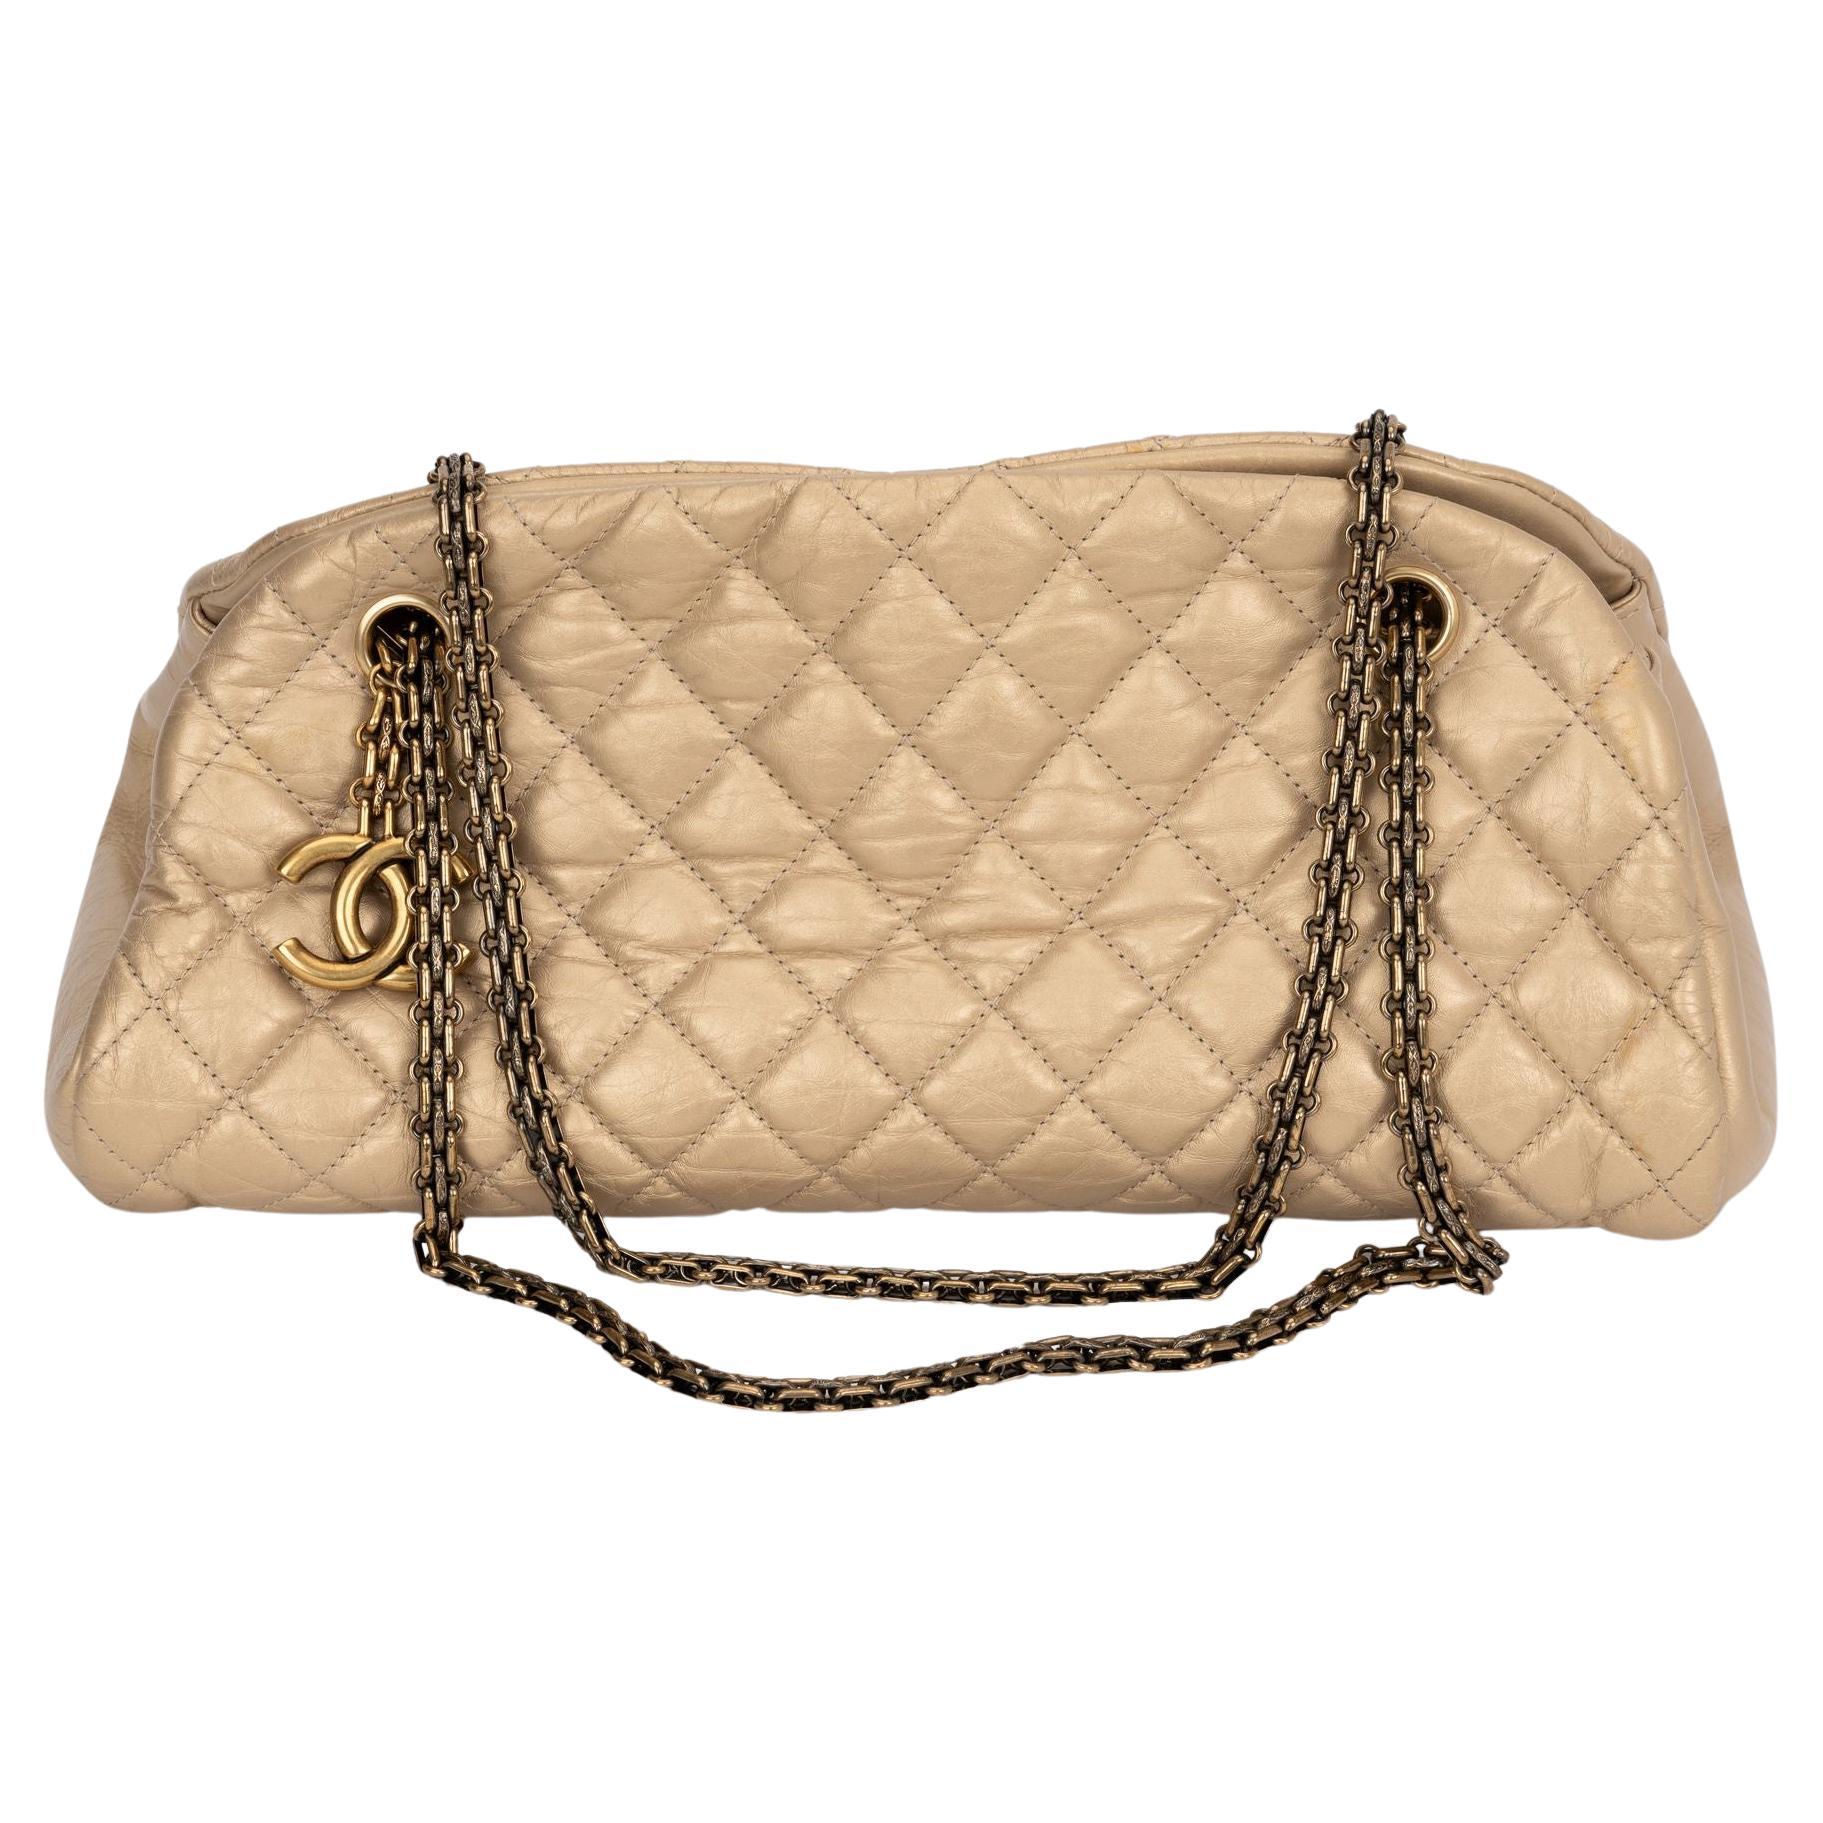 Chanel Gold Distressed Mademoiselle Bag For Sale